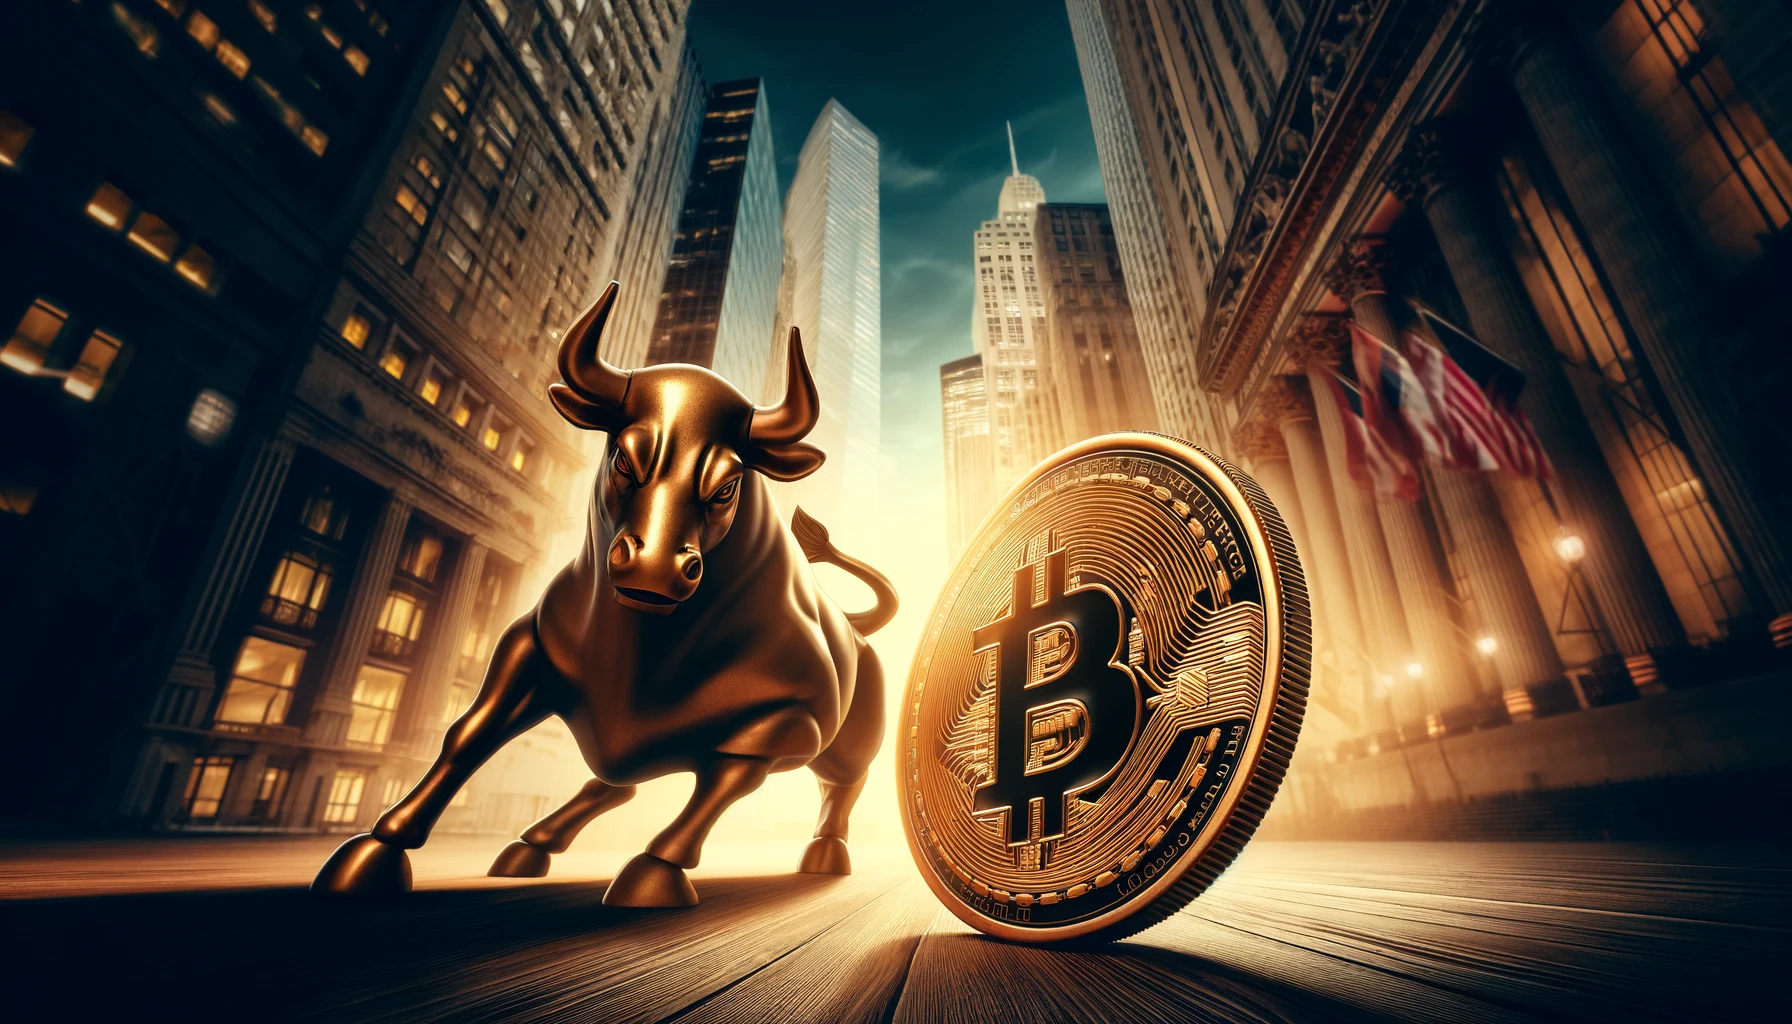 Is This The Biggest Bitcoin Bull Run Ever? Analyst Says Yes!